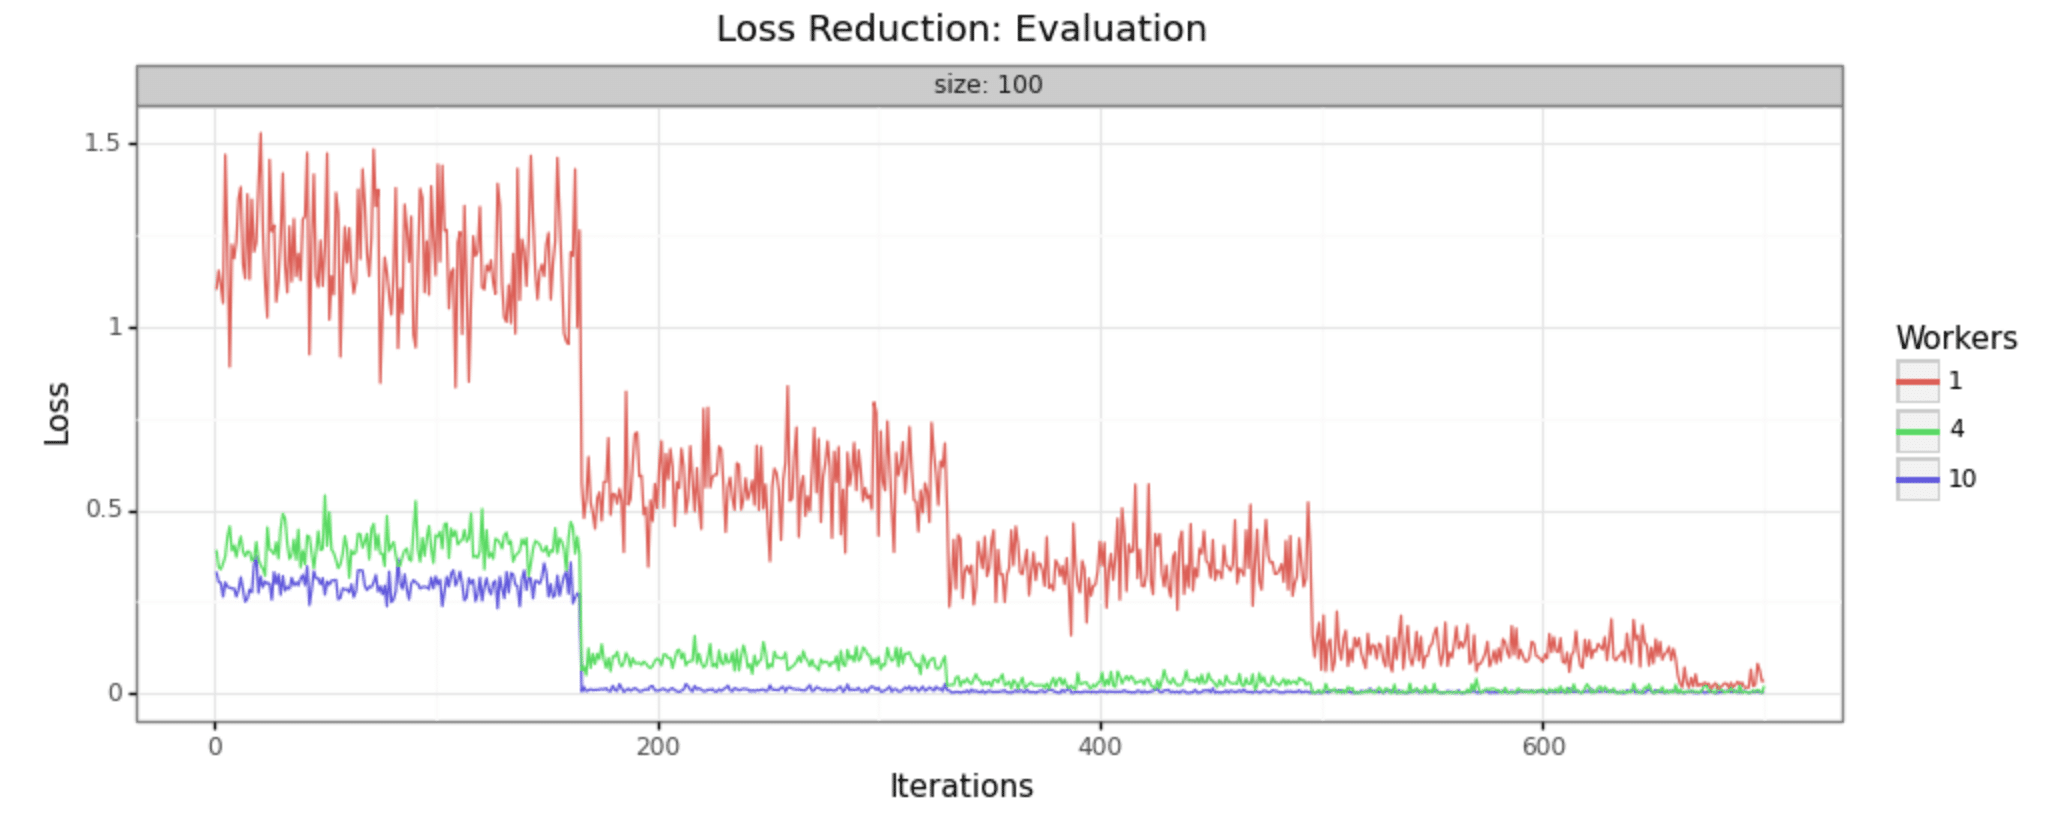 Loss reduction: Evaluation